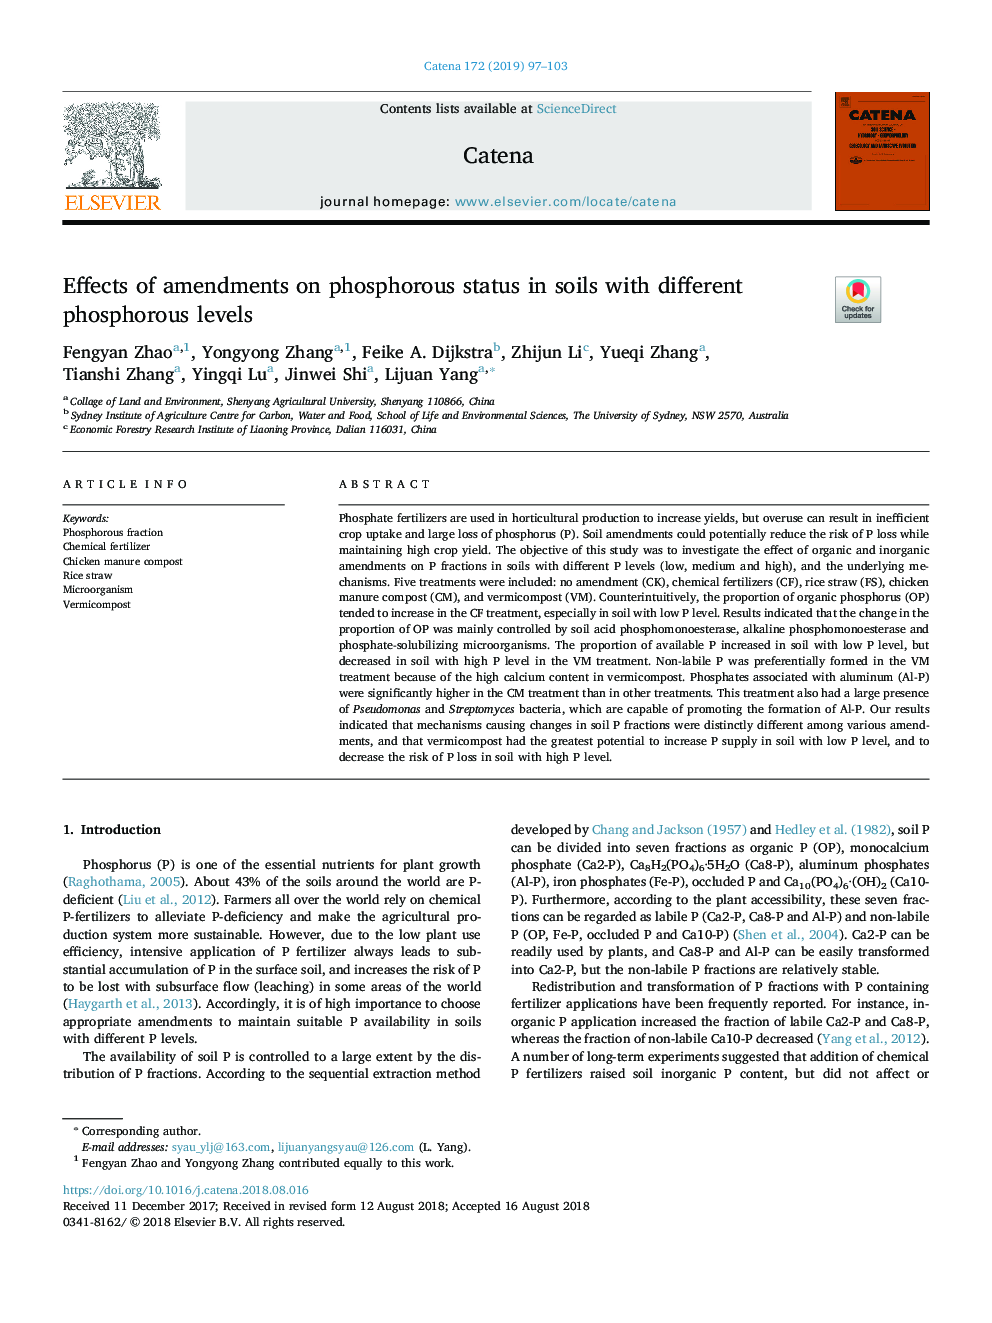 Effects of amendments on phosphorous status in soils with different phosphorous levels